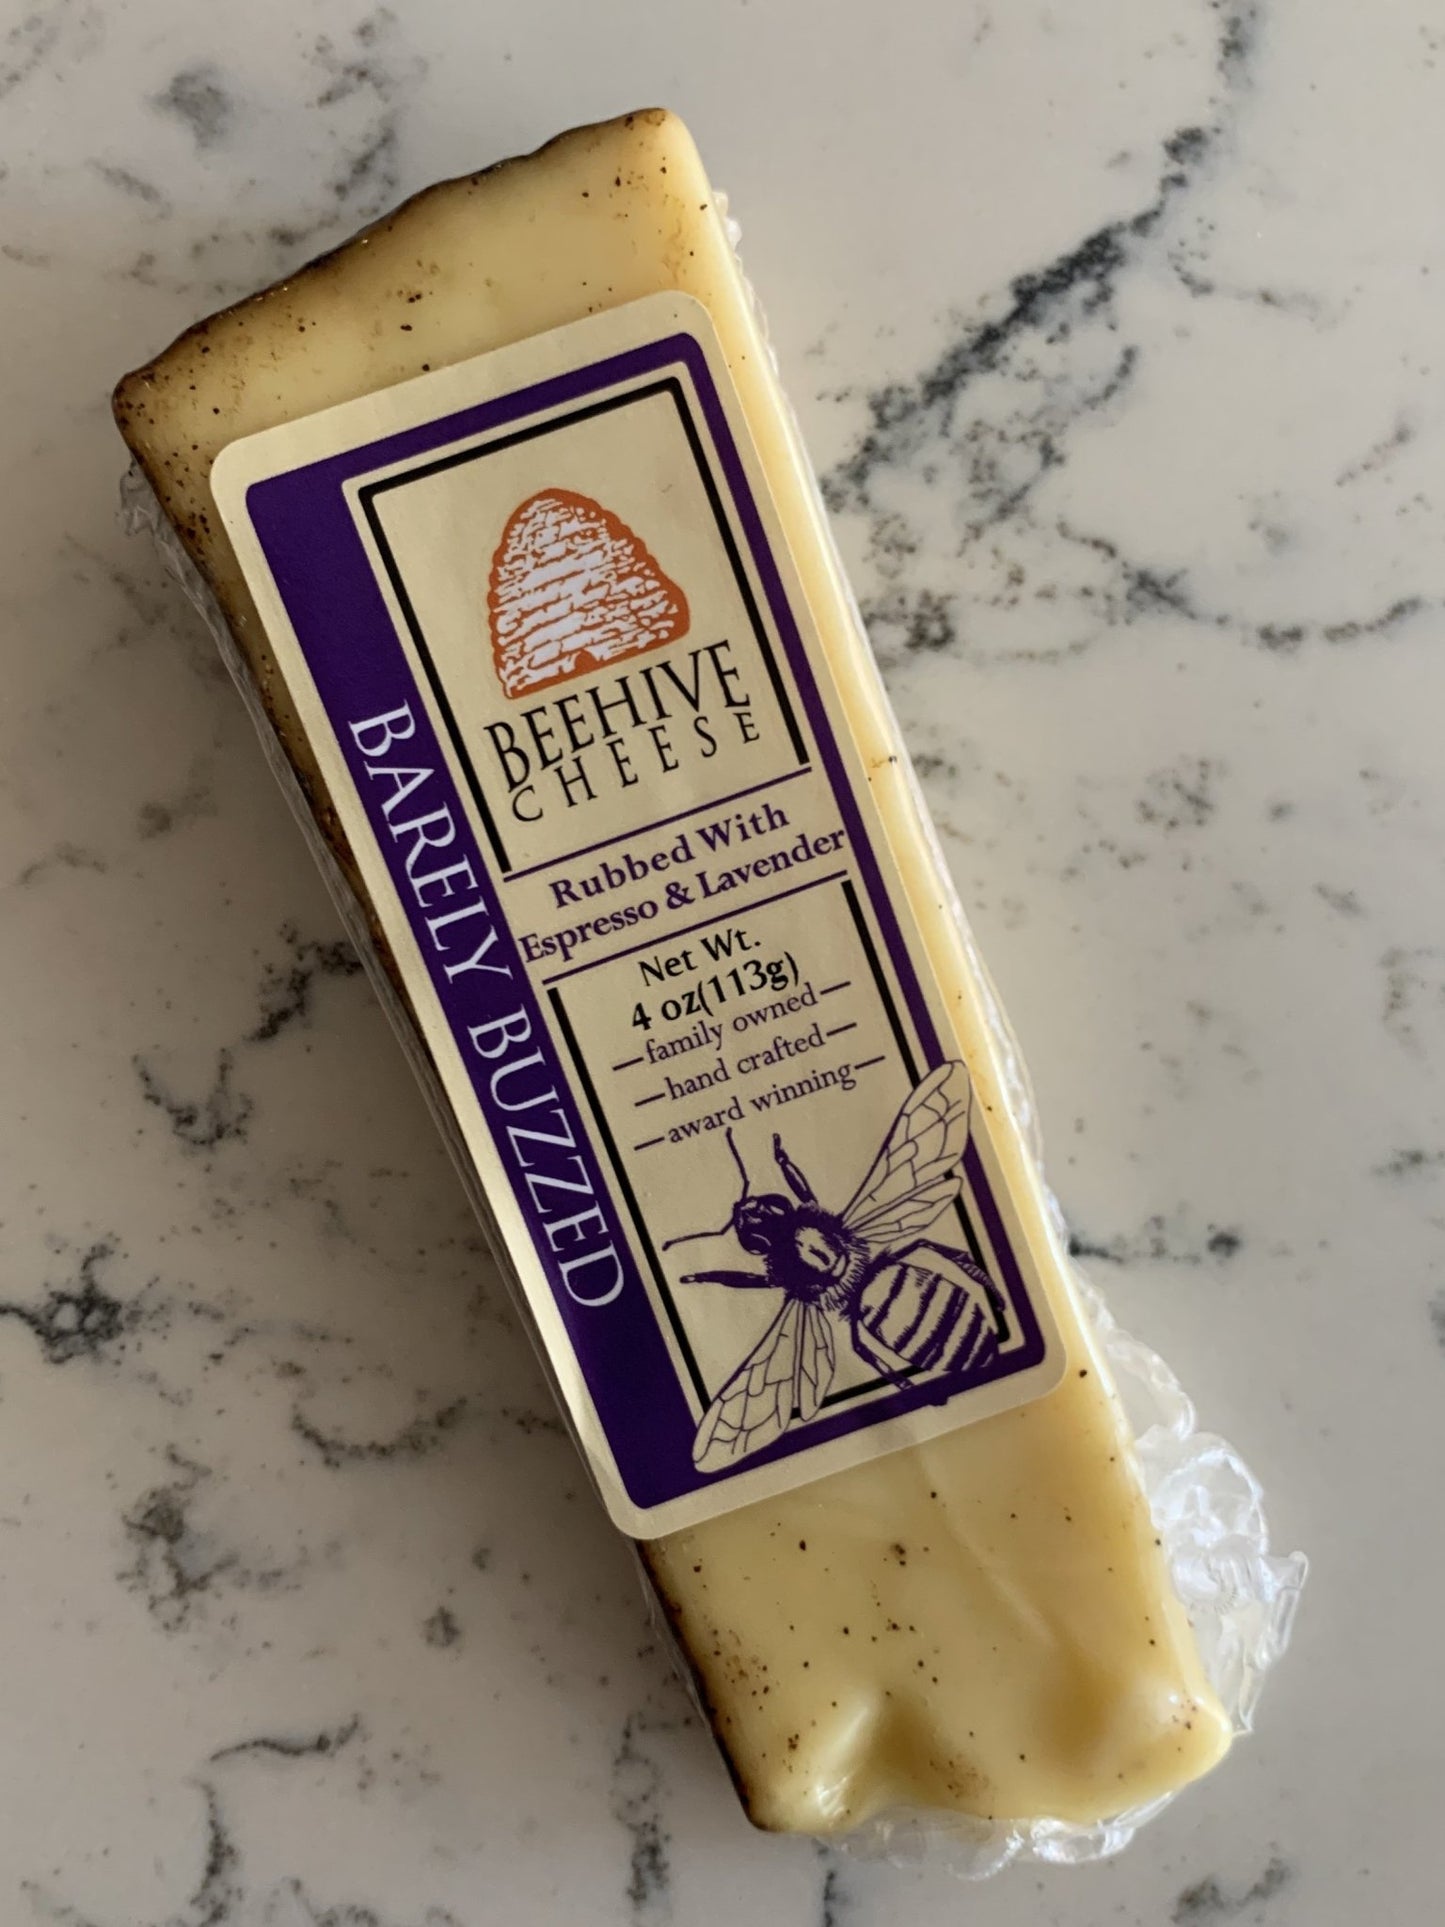 Load image into Gallery viewer, Beehive Cheese &amp;quot;Barely Buzzed&amp;quot; Cheddar rubbed with Espresso and Lavender, Utah (4oz) - DECANTsf
